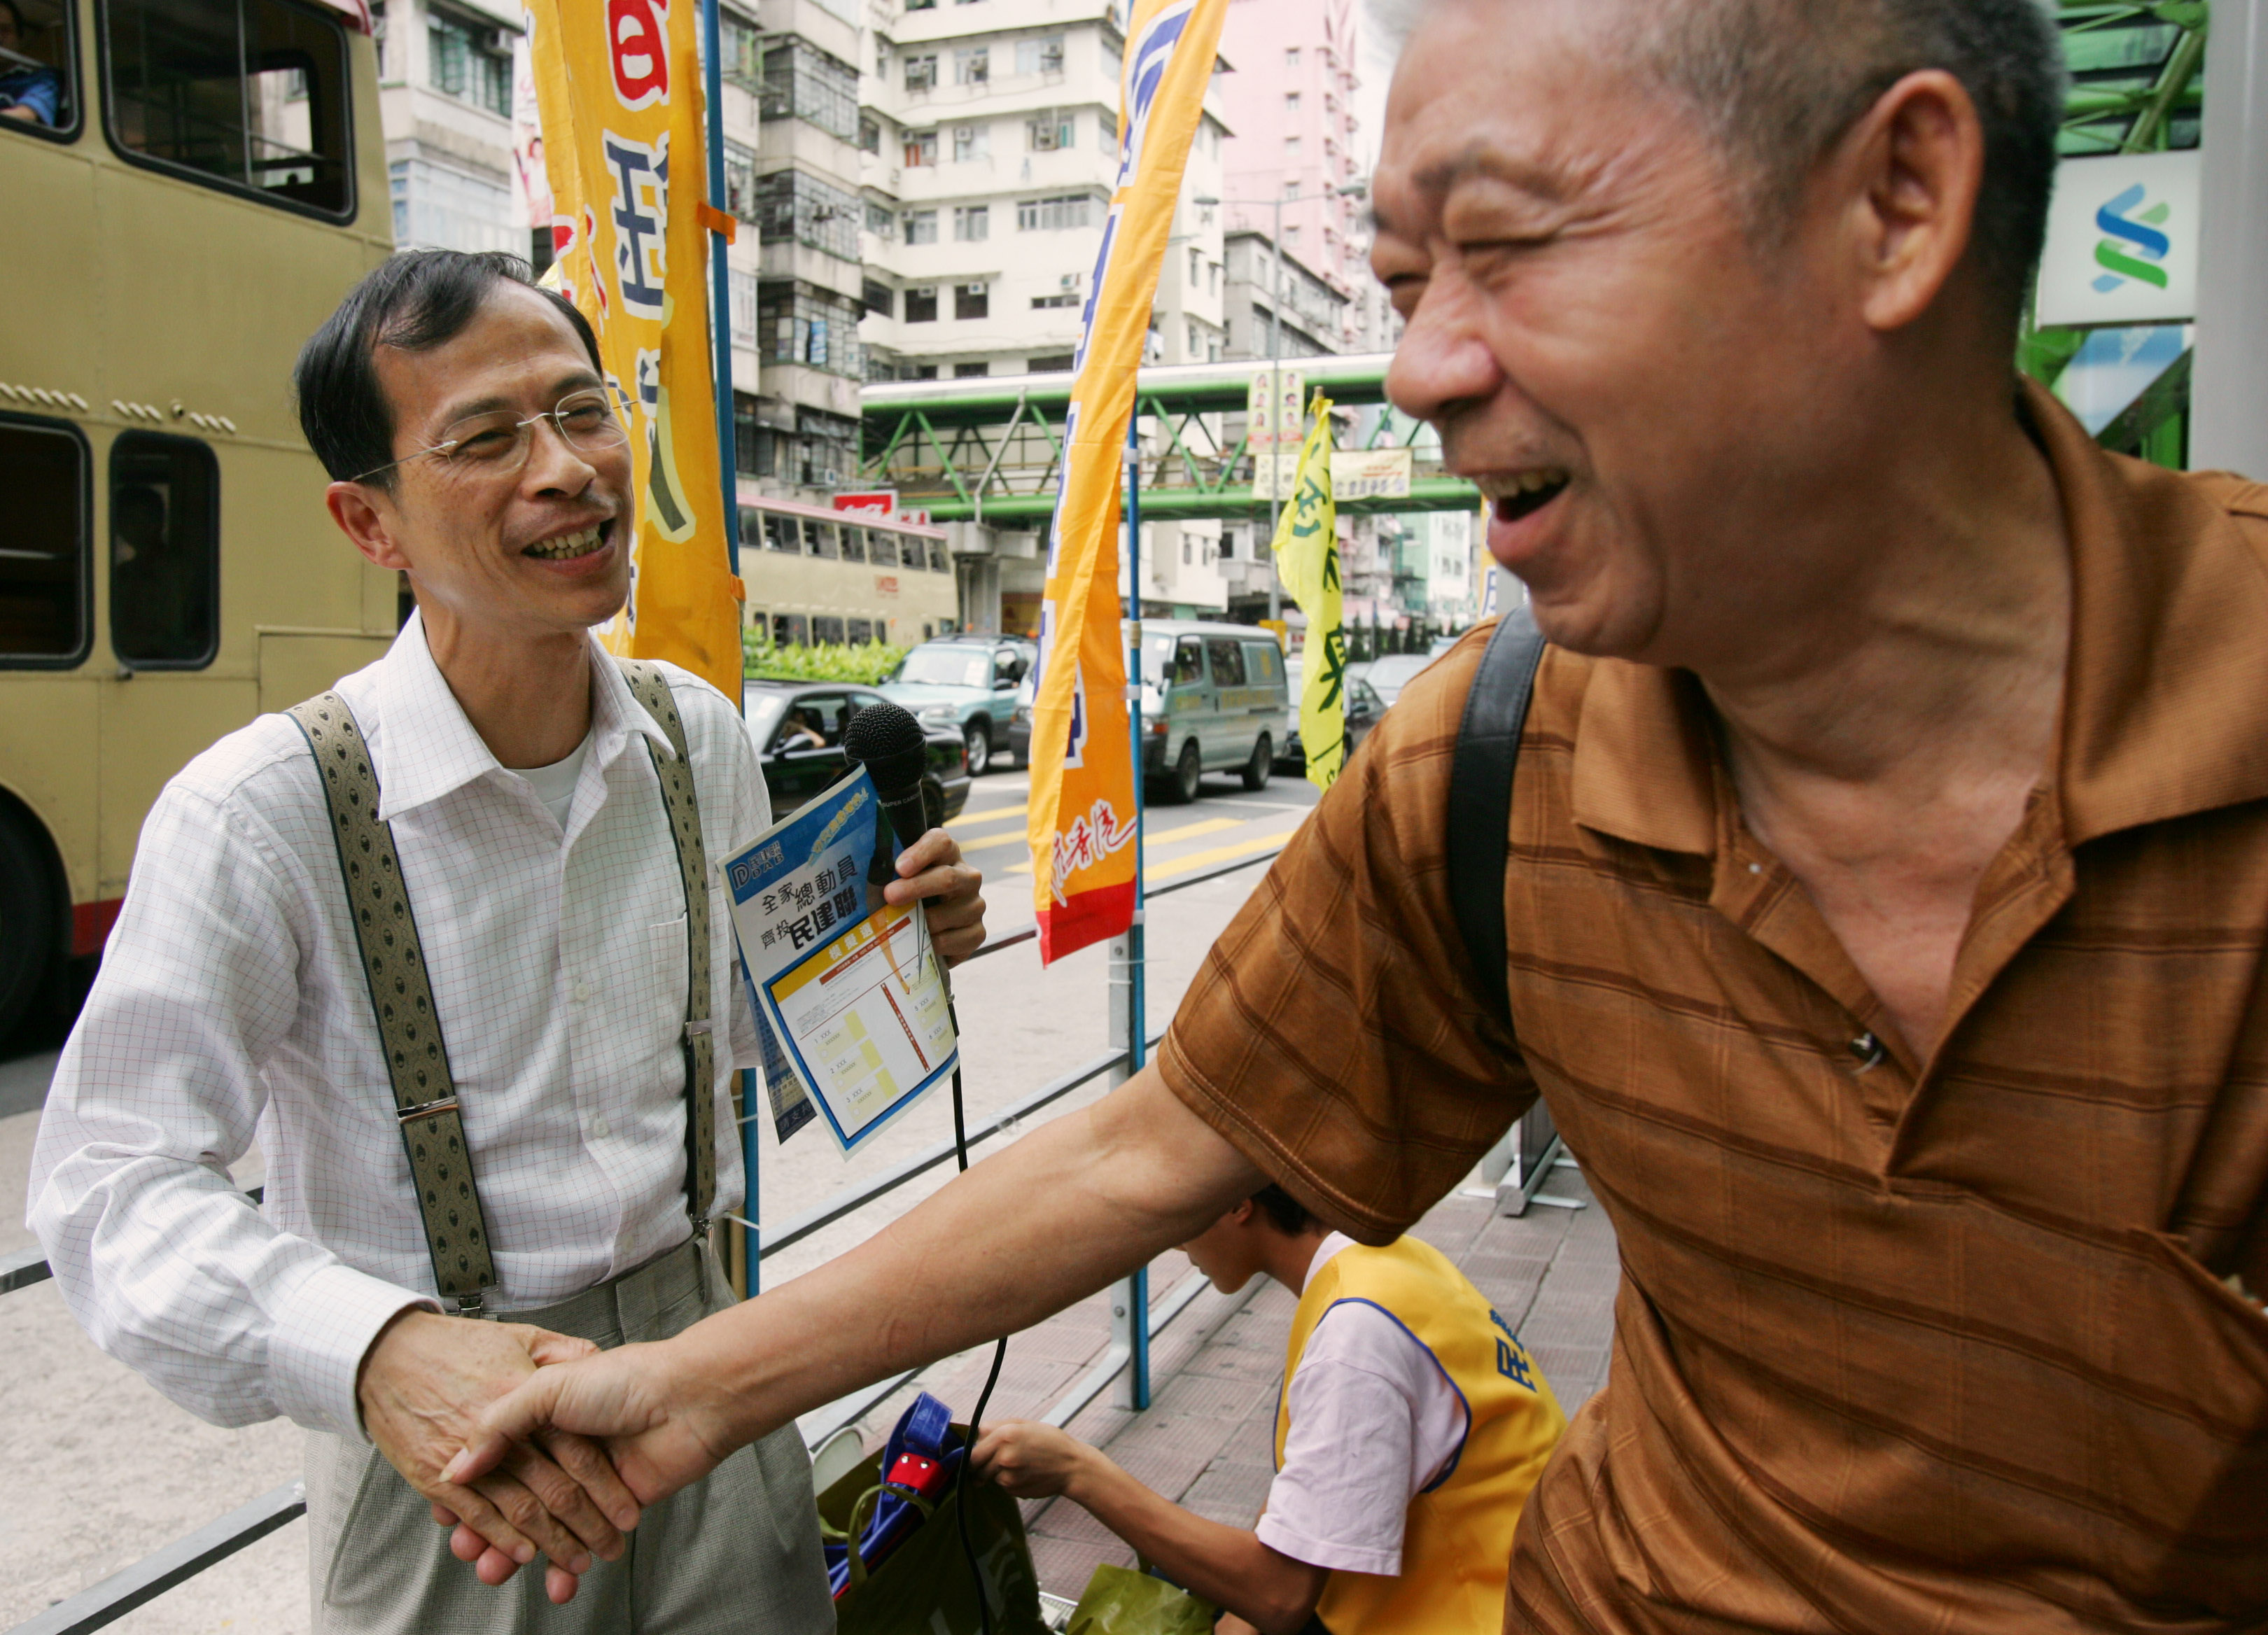 "Hong Kong's most popular lawmaker." Tsang Yok-sing shakes hands with a supporter as he campaigns for legislative elections in Hong Kong in this file photo from September 2004. (Reuters)